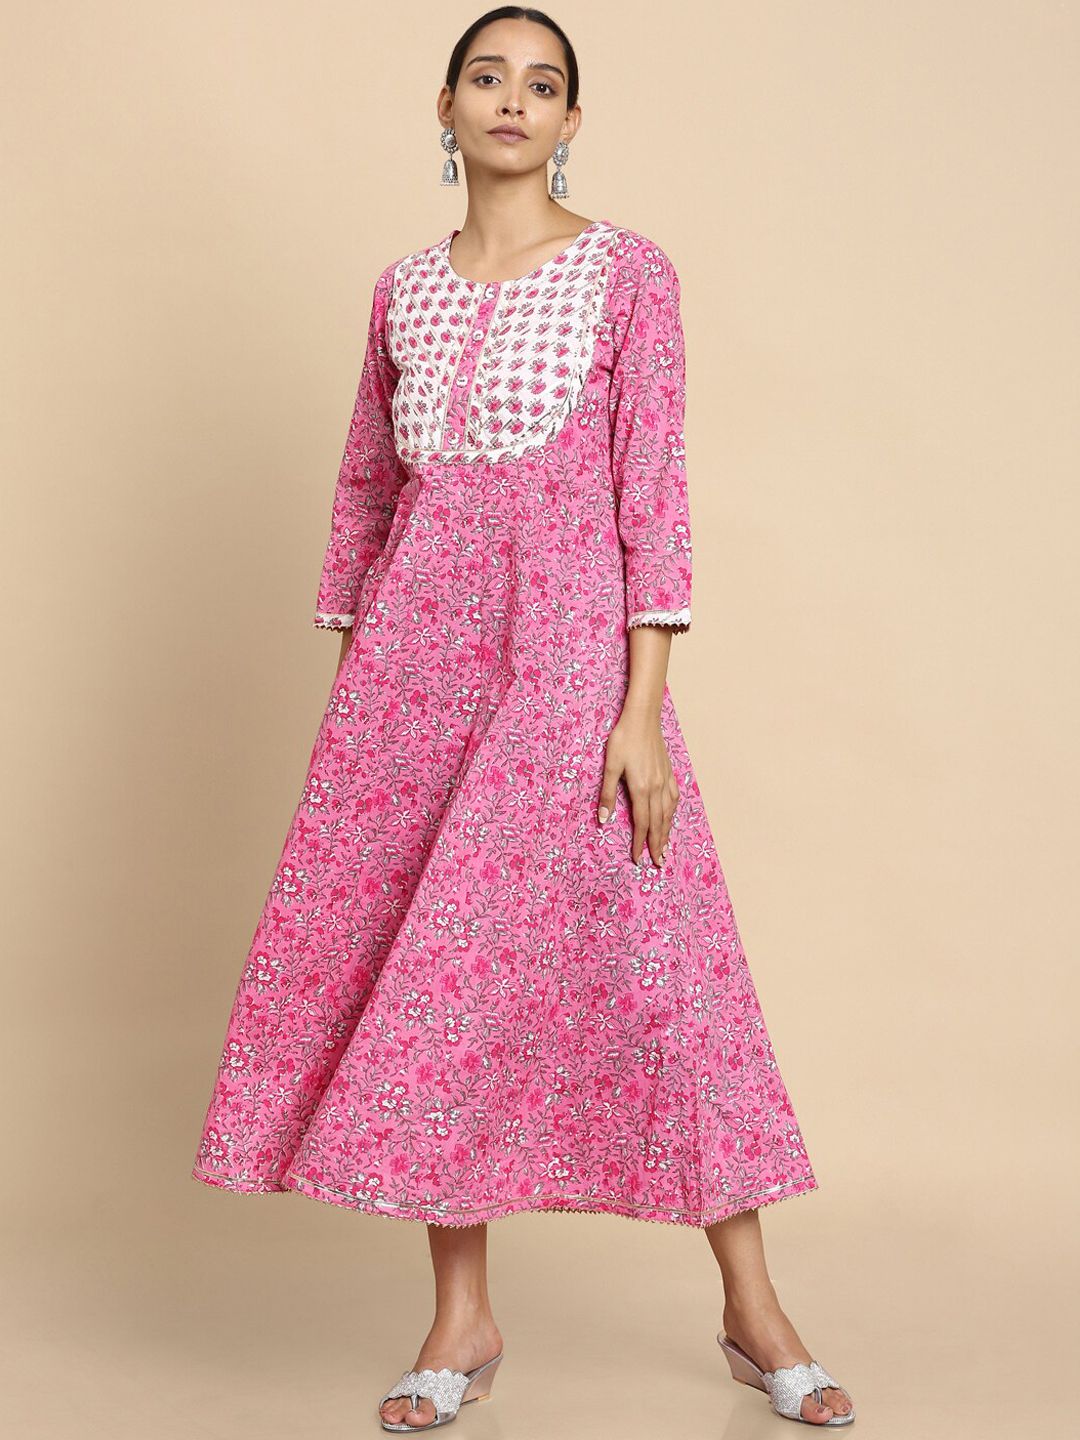 Soch Women Pink Floral Printed Floral Ethnic Dress Price in India